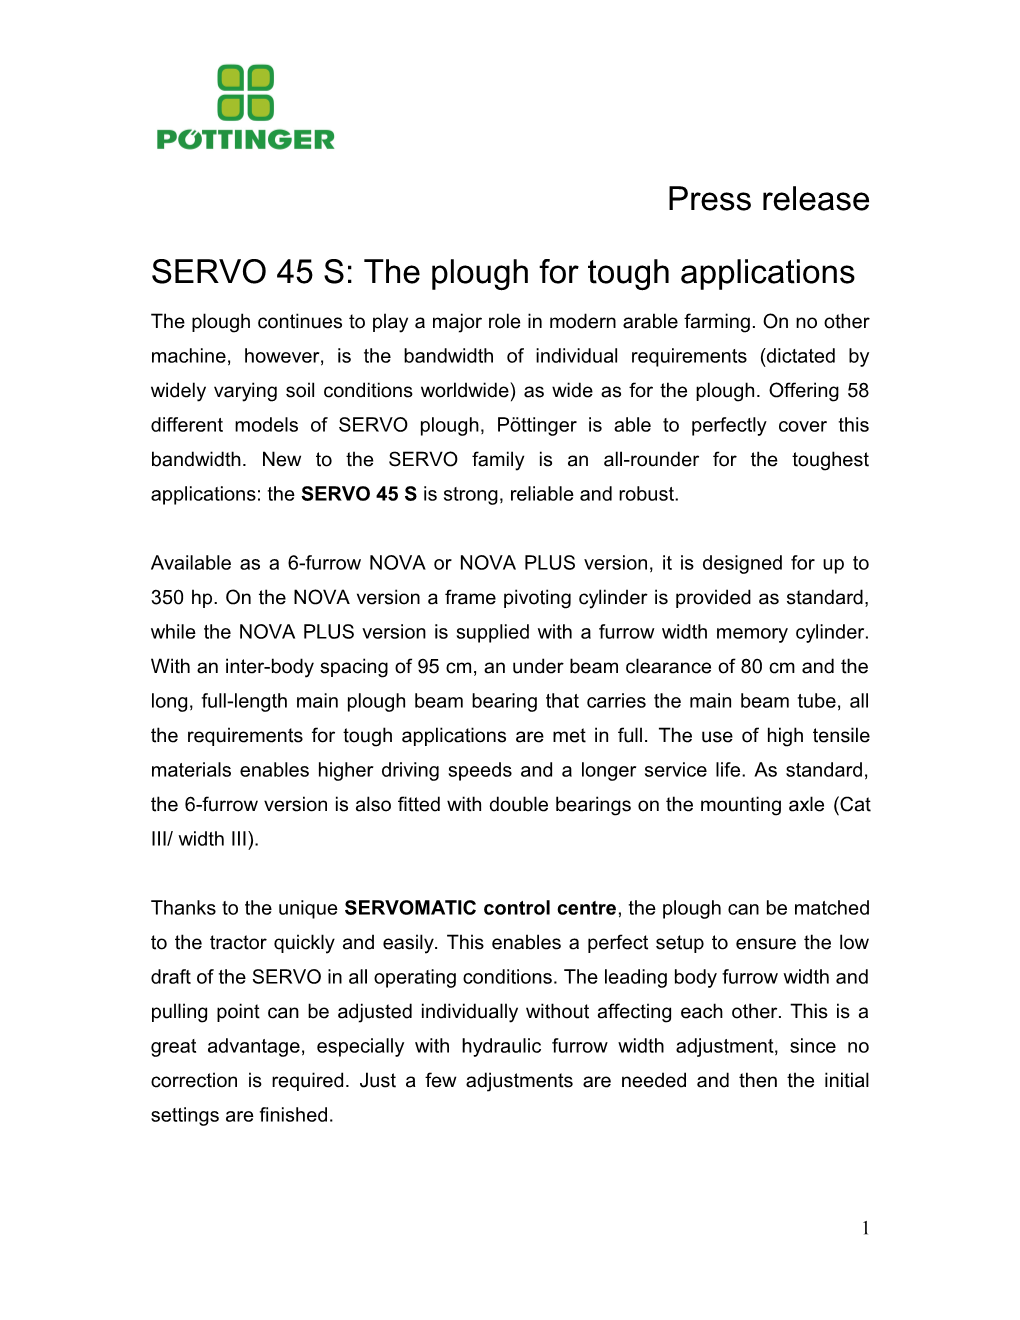 SERVO 45 S: the Plough for Tough Applications